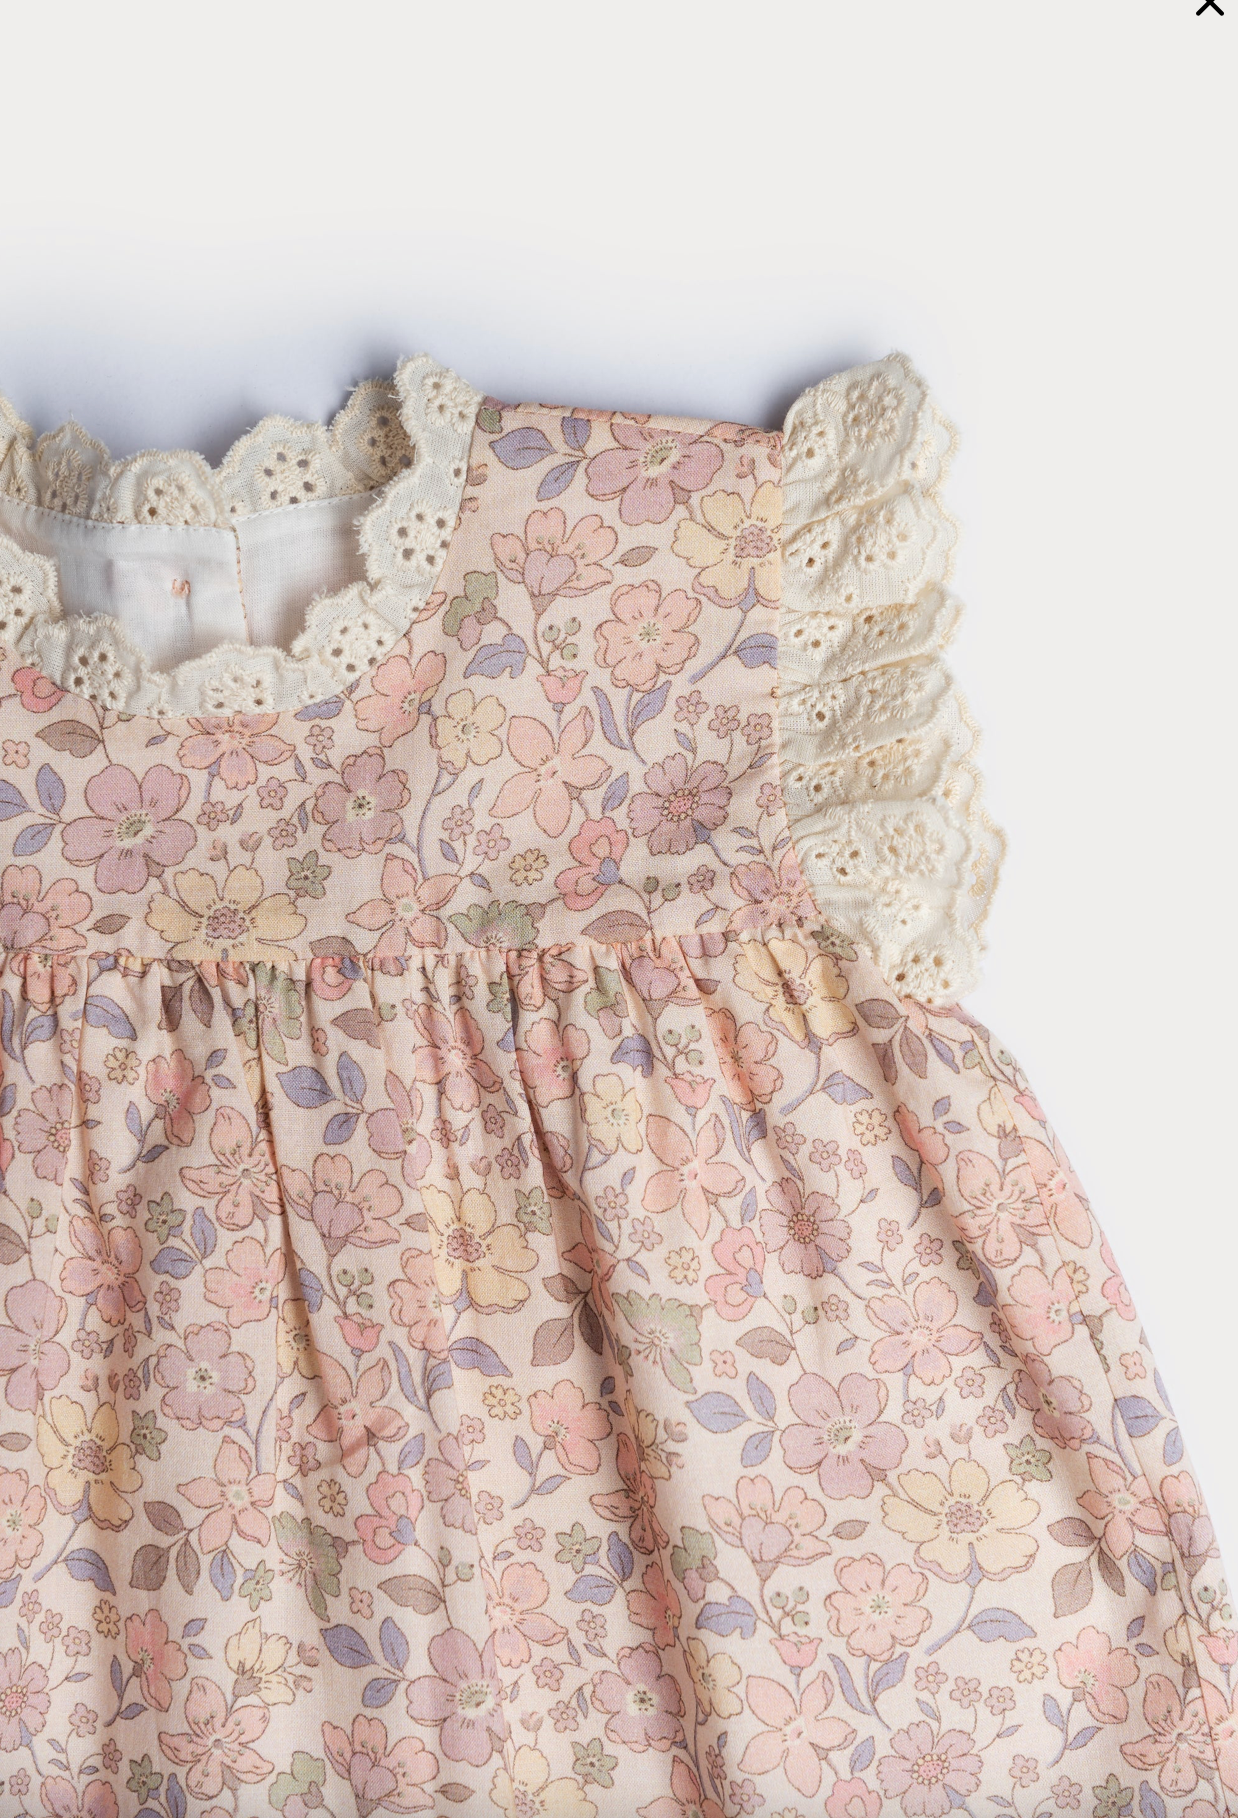 Early Sunday - Susie Dress w/ Broiderie Frills & Cherry Frill Bloomer in Multi Muted Flower